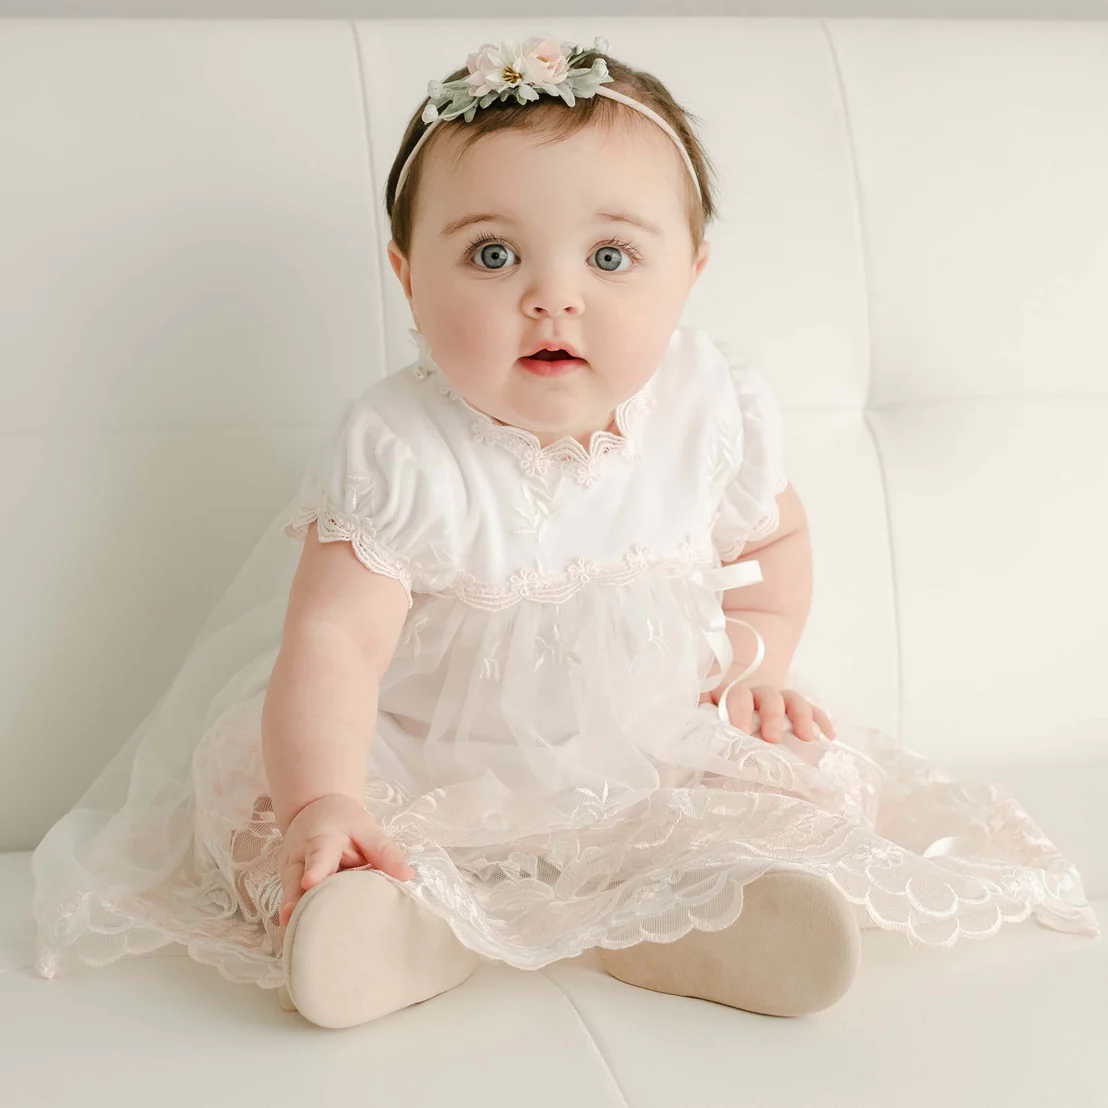 Delicate Lace Romper Dress Baby Girl EAster clothes